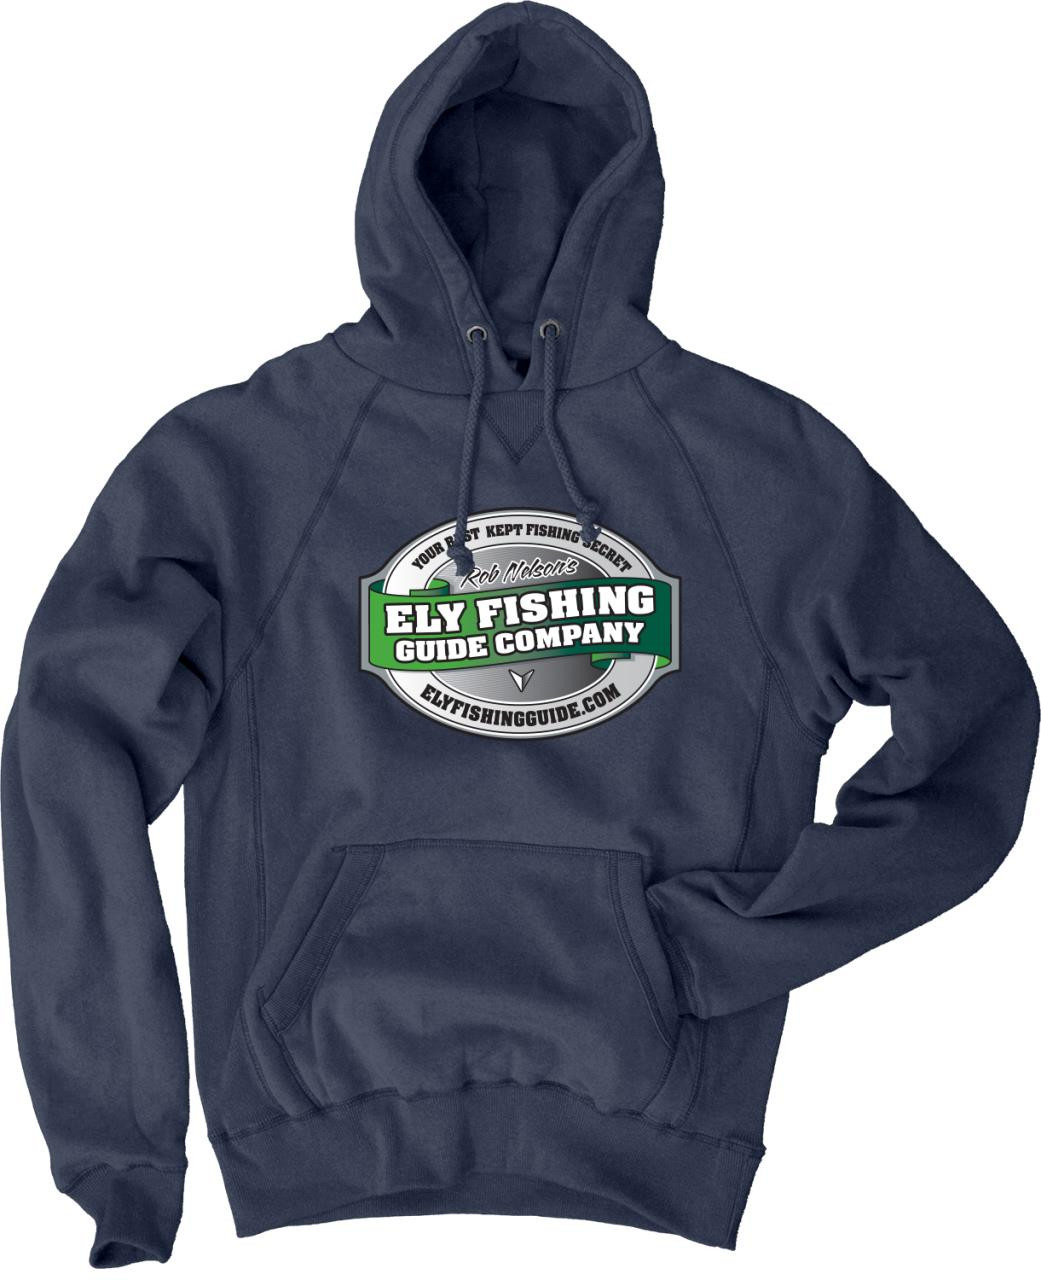 Ely Fishing Guide Company Hoody - 2 colors